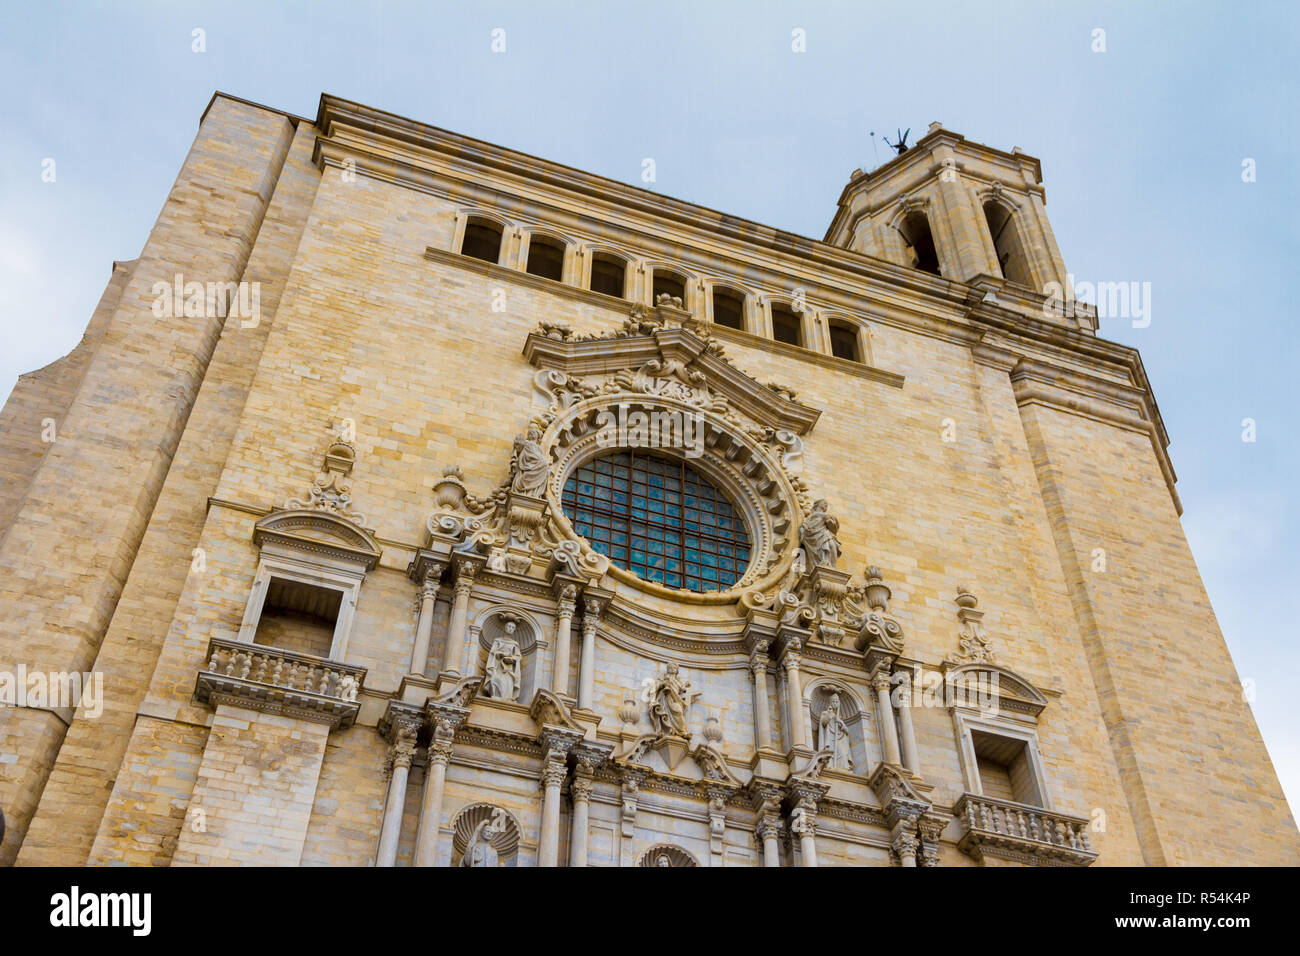 The Girona Cathedral, is a Roman Catholic church located in Girona, Catalonia, Spain Stock Photo